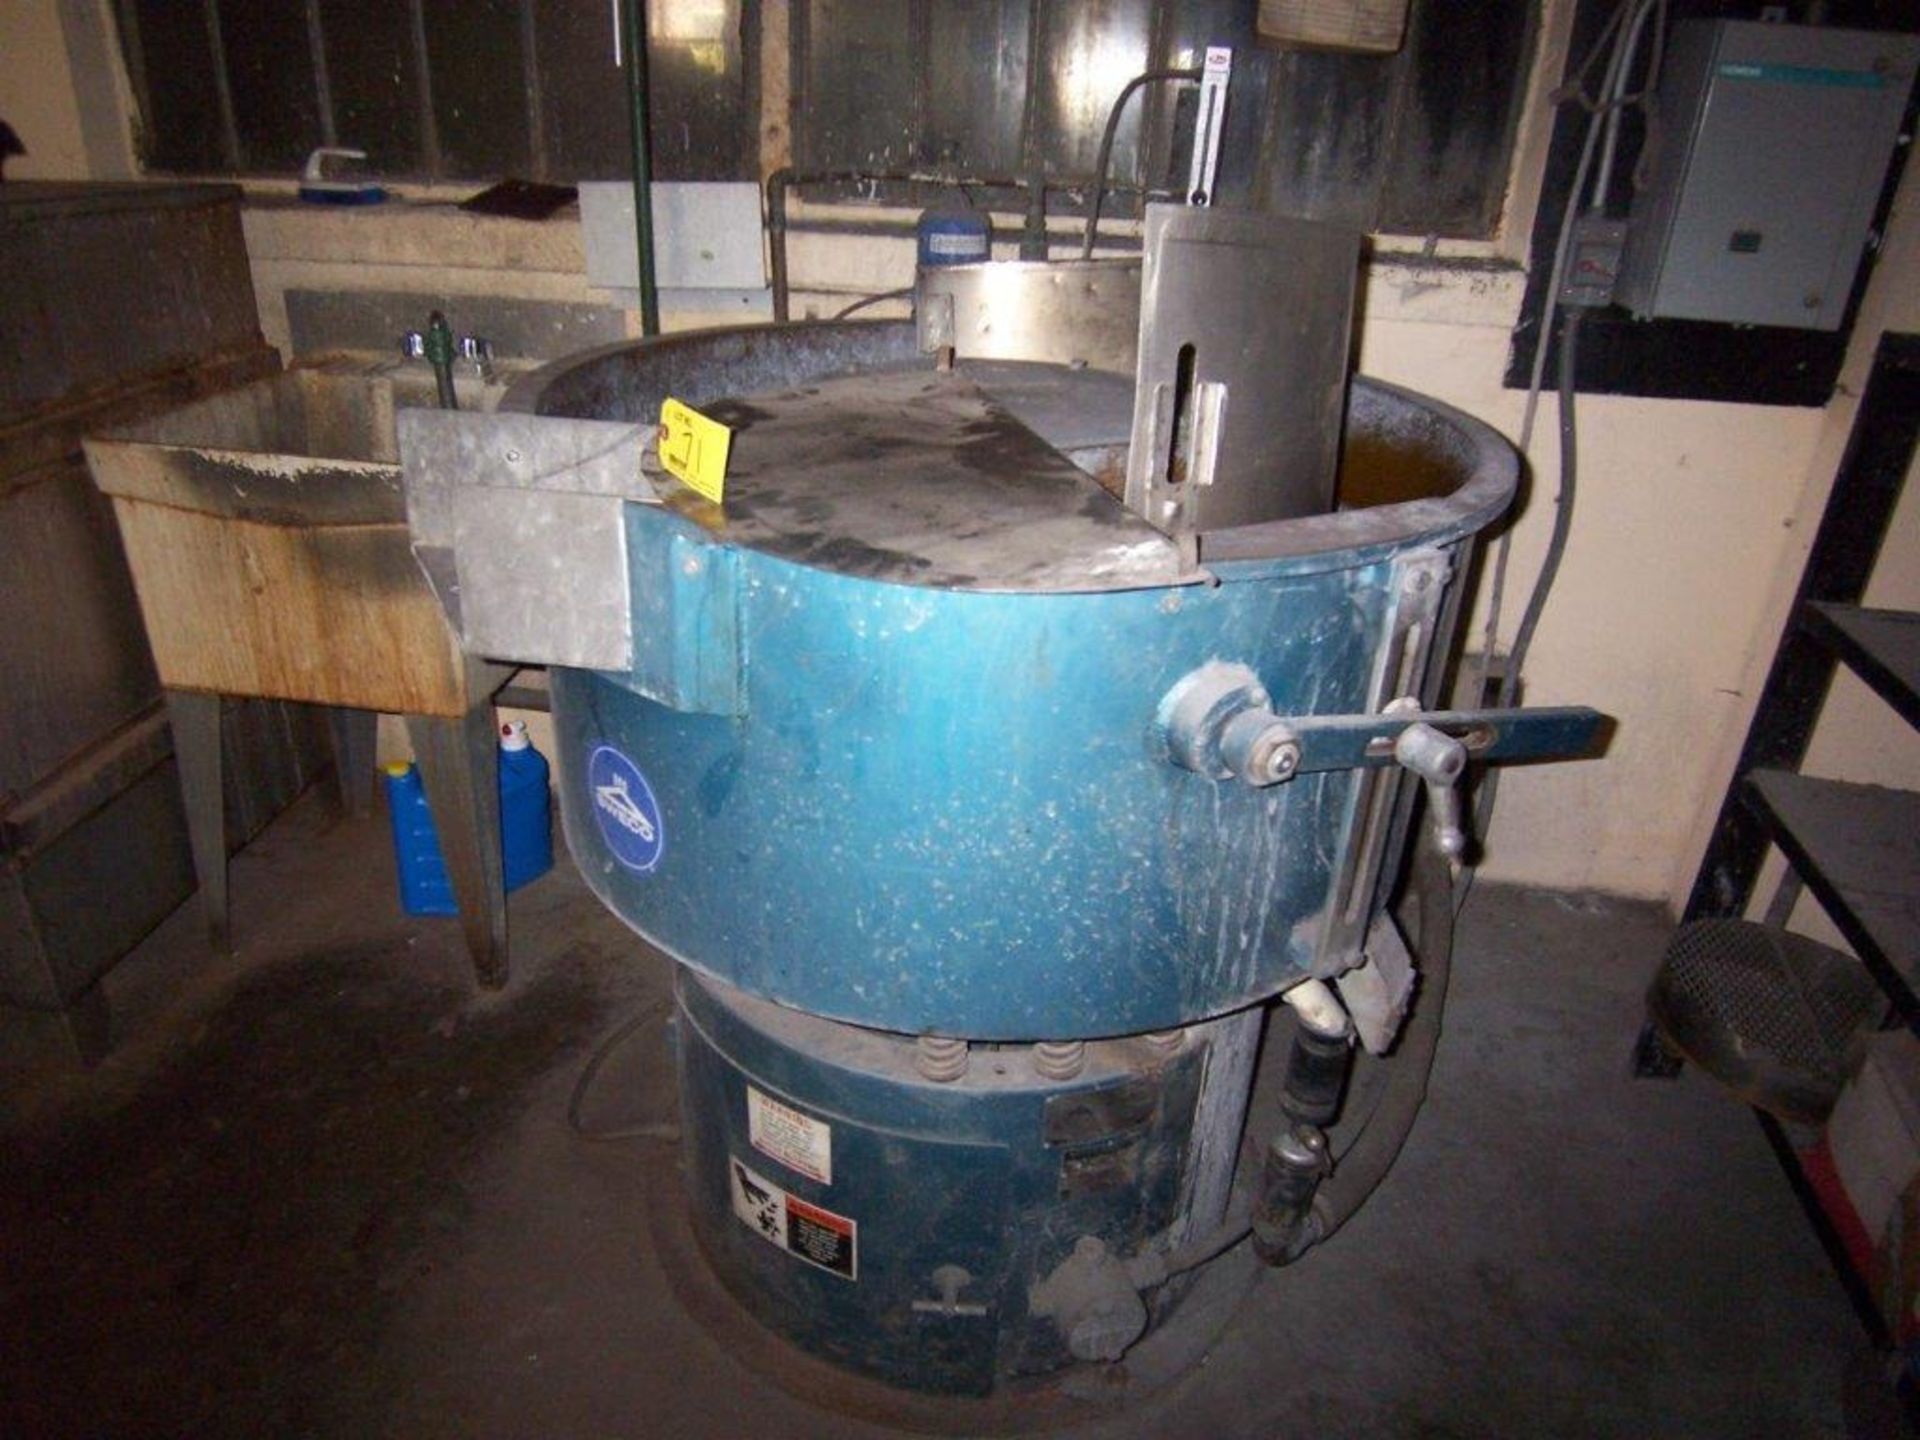 SWECO MDL FMD-3LR VIBRATORY FINISHER, 34'' DIAMETER, 2-1/2 HP, RUBBER LINED, D/N: 621618-A496 - Image 2 of 2